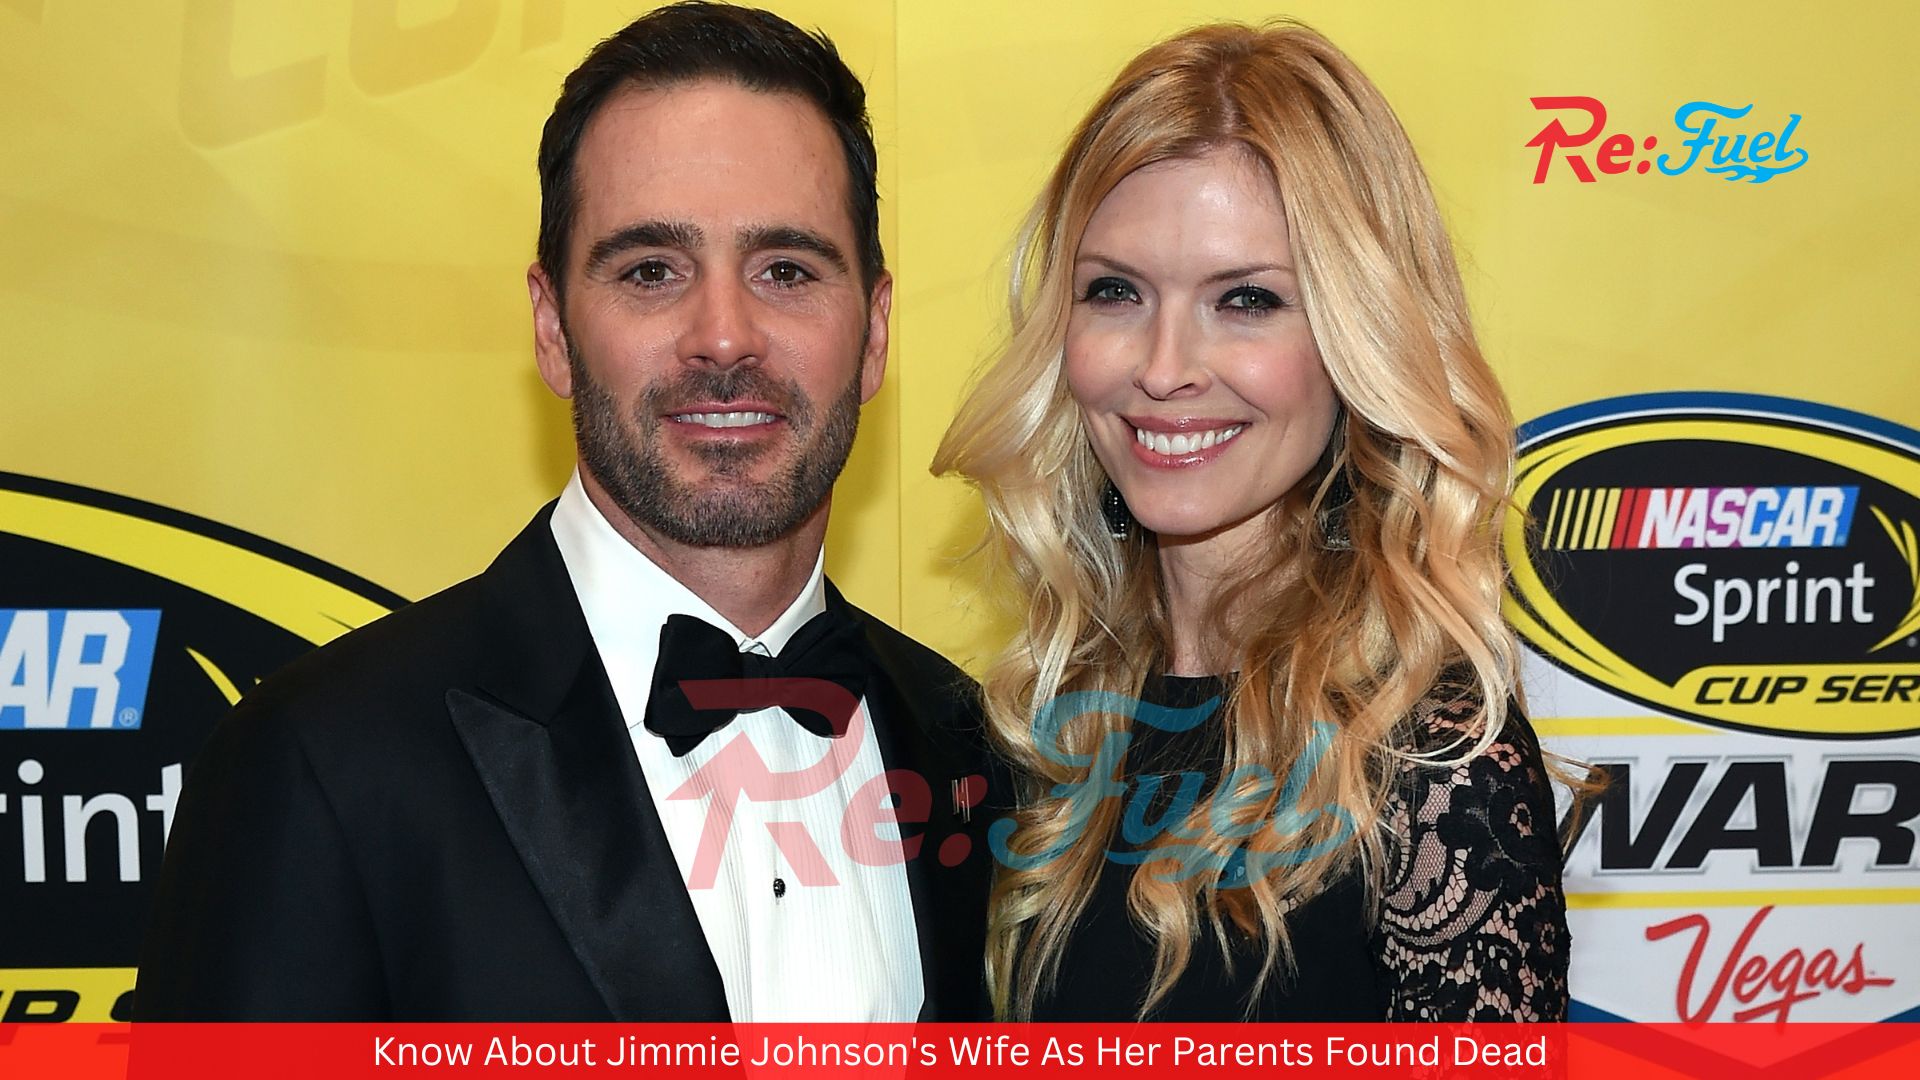 Know About Jimmie Johnson's Wife As Her Parents Found Dead